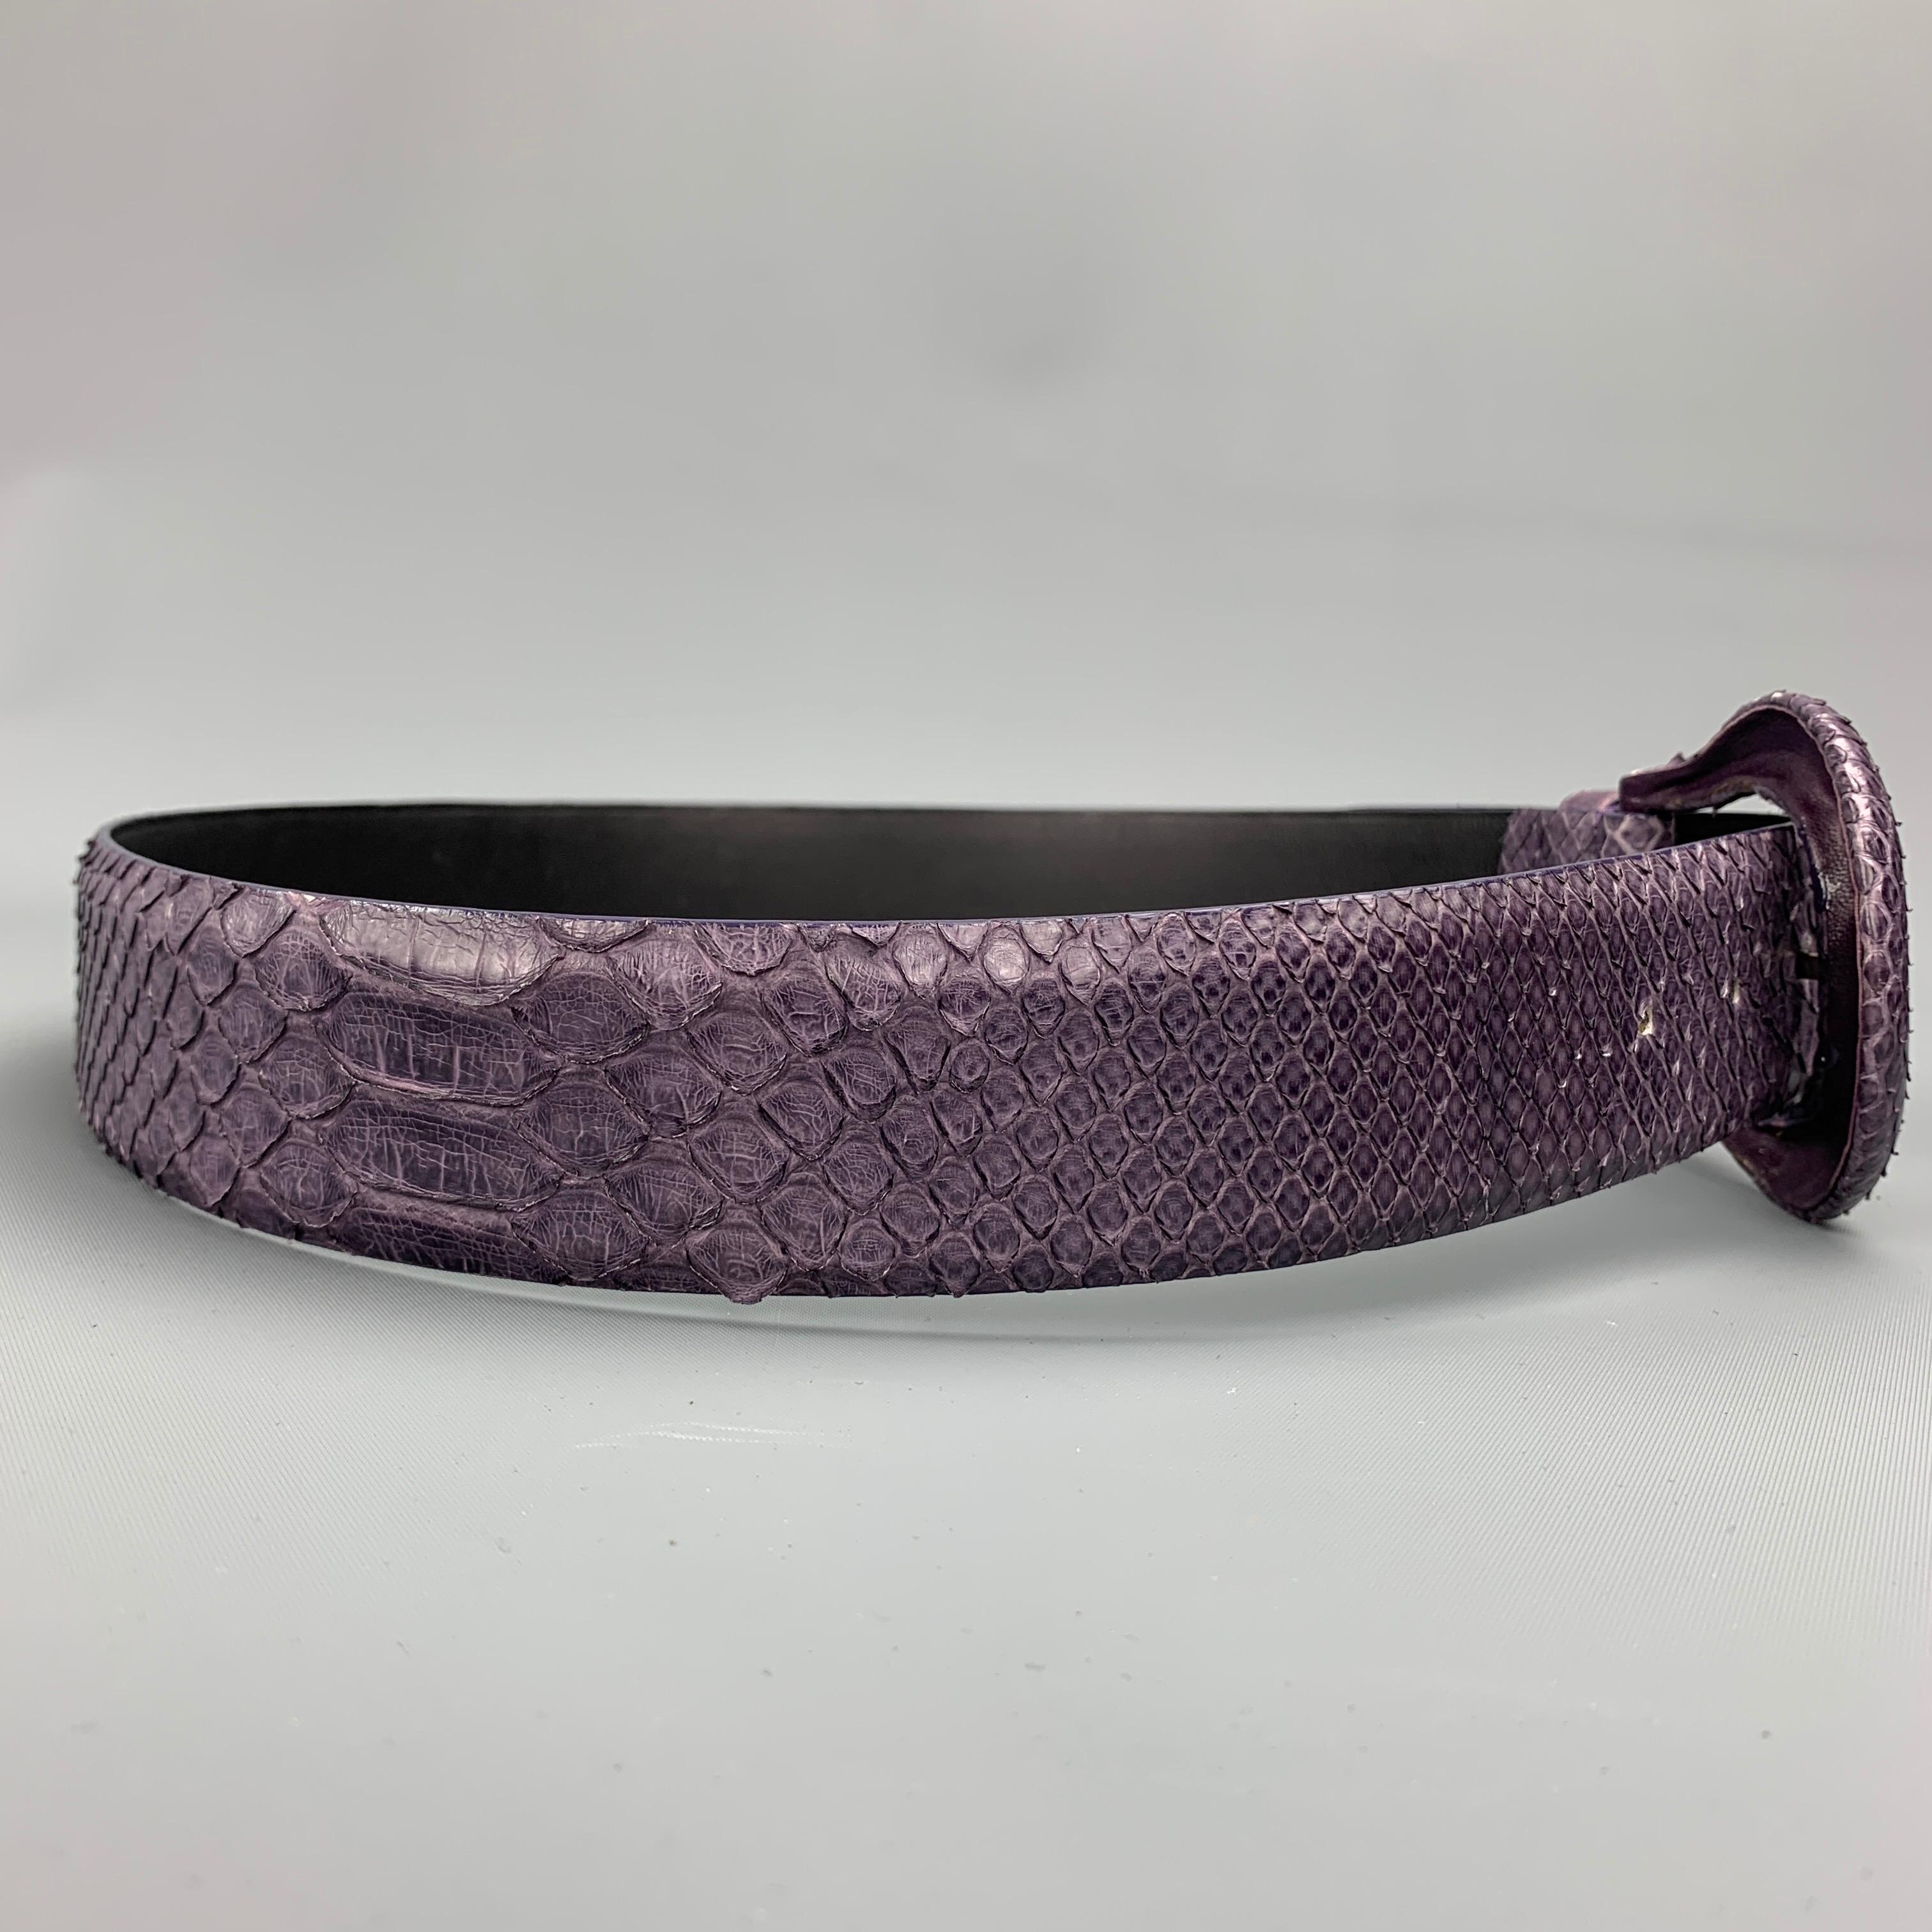 ORCIANI belt comes in a purple snake skin leather featuring a covered buckle. Made in Italy. 

Very Good Pre-Owned Condition.
Marked: 75

Length: 37 in.
Width: 1.5 in.
Fits: 28 in. - 32 in.
Buckle: 2 in.  

SKU: 98511
Category: Belt

More